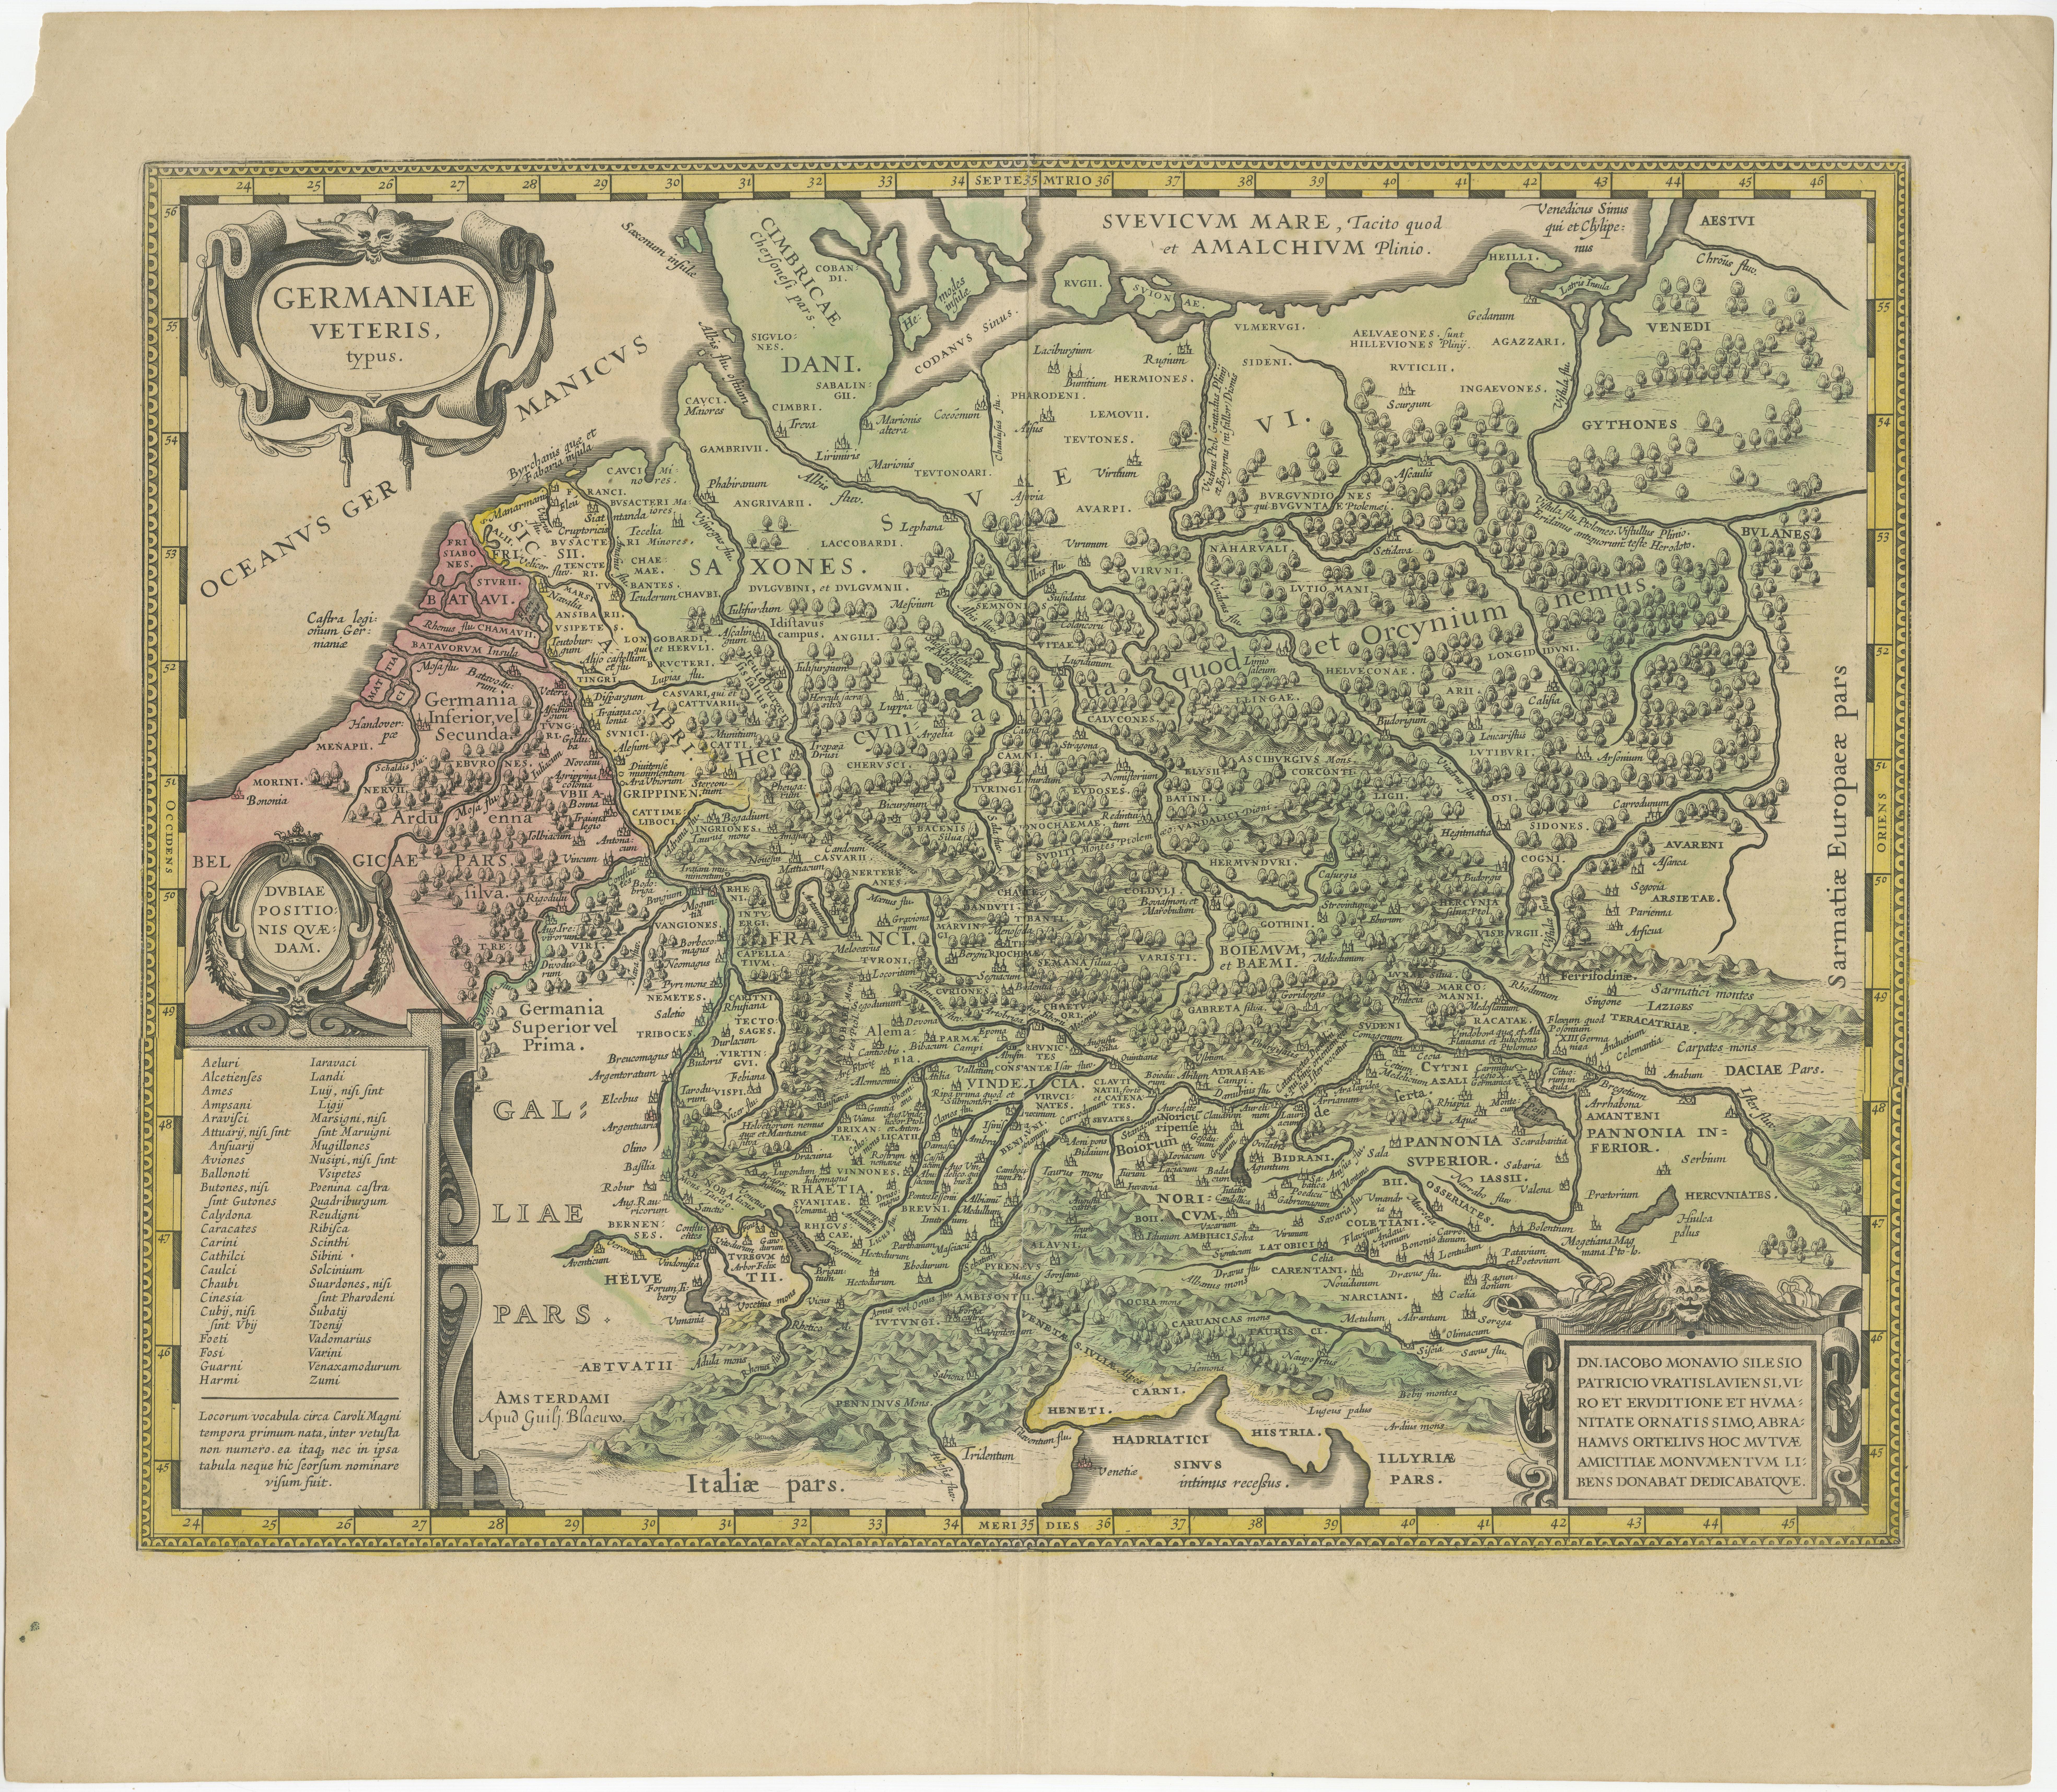 Antique map titled 'Germaniae Veteris typus'. Very attractive map of ancient Germany. Published by G. Blaeu after A. Ortelius, circa 1630. 

Willem Janszoon Blaeu (1571-1638) was a prominent Dutch geographer and publisher. Born the son of a herring